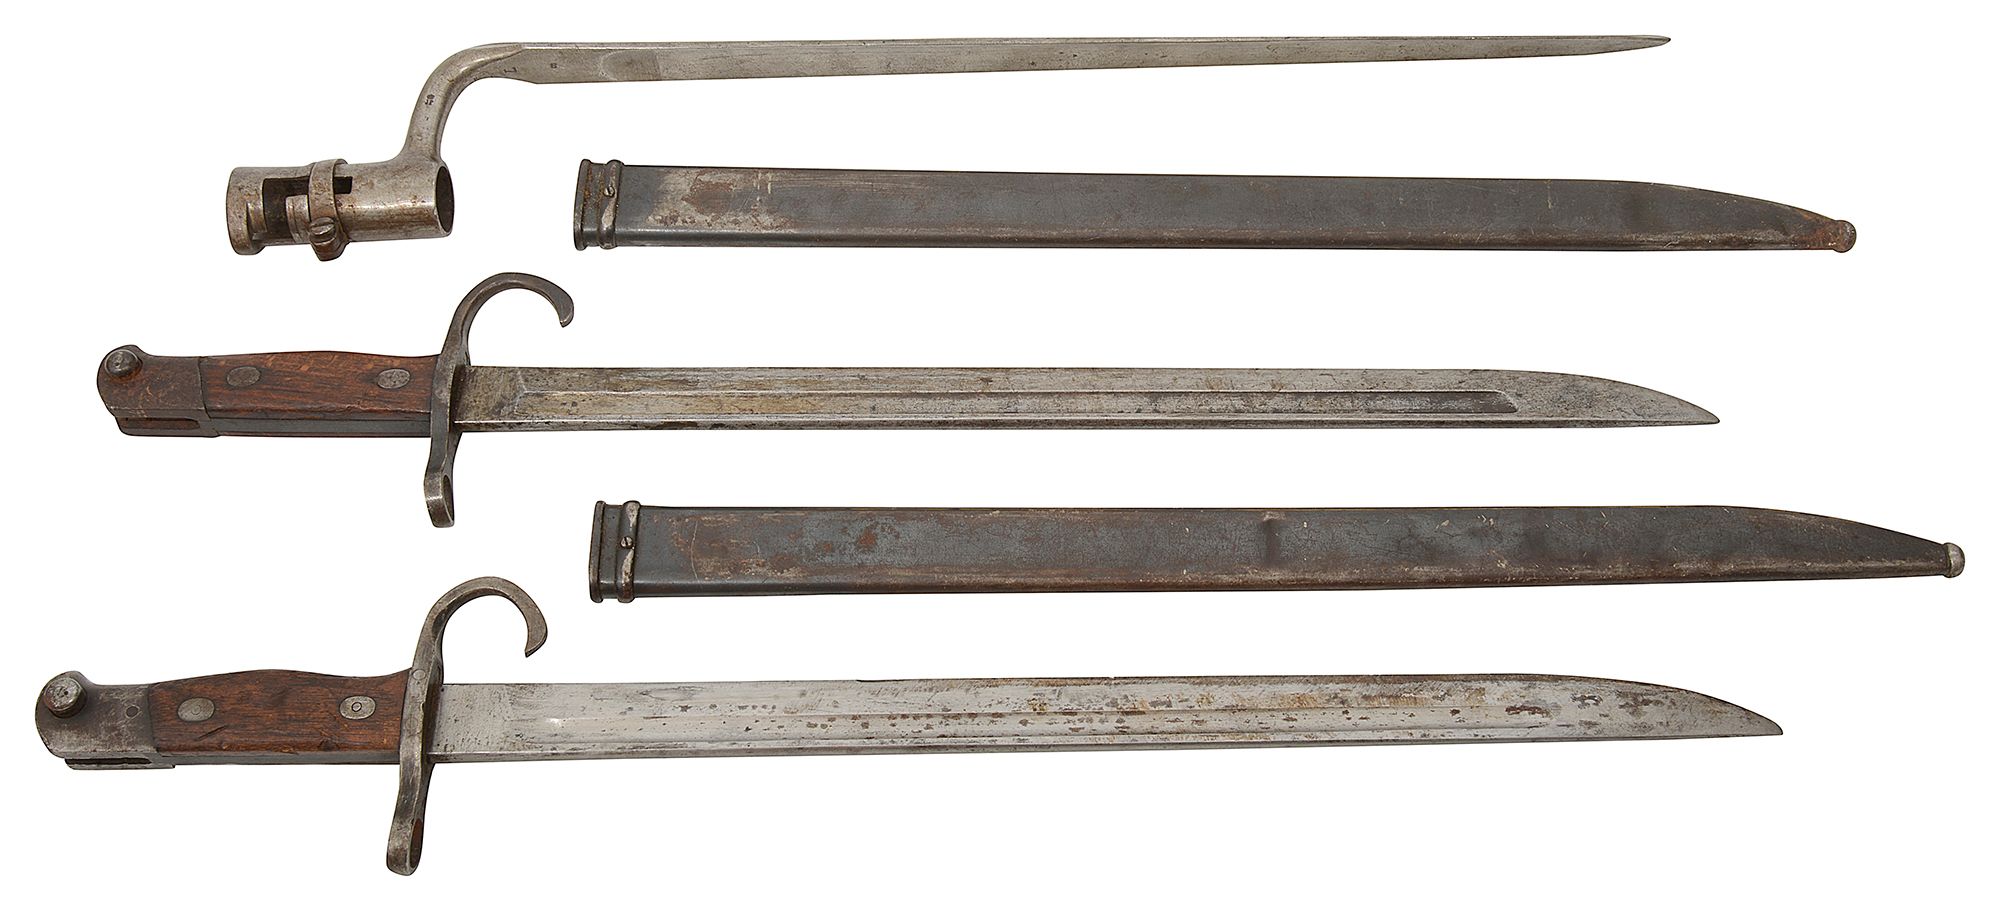 A triangular socket bayonet and two Japanese Type 30 bayonets and scabbards